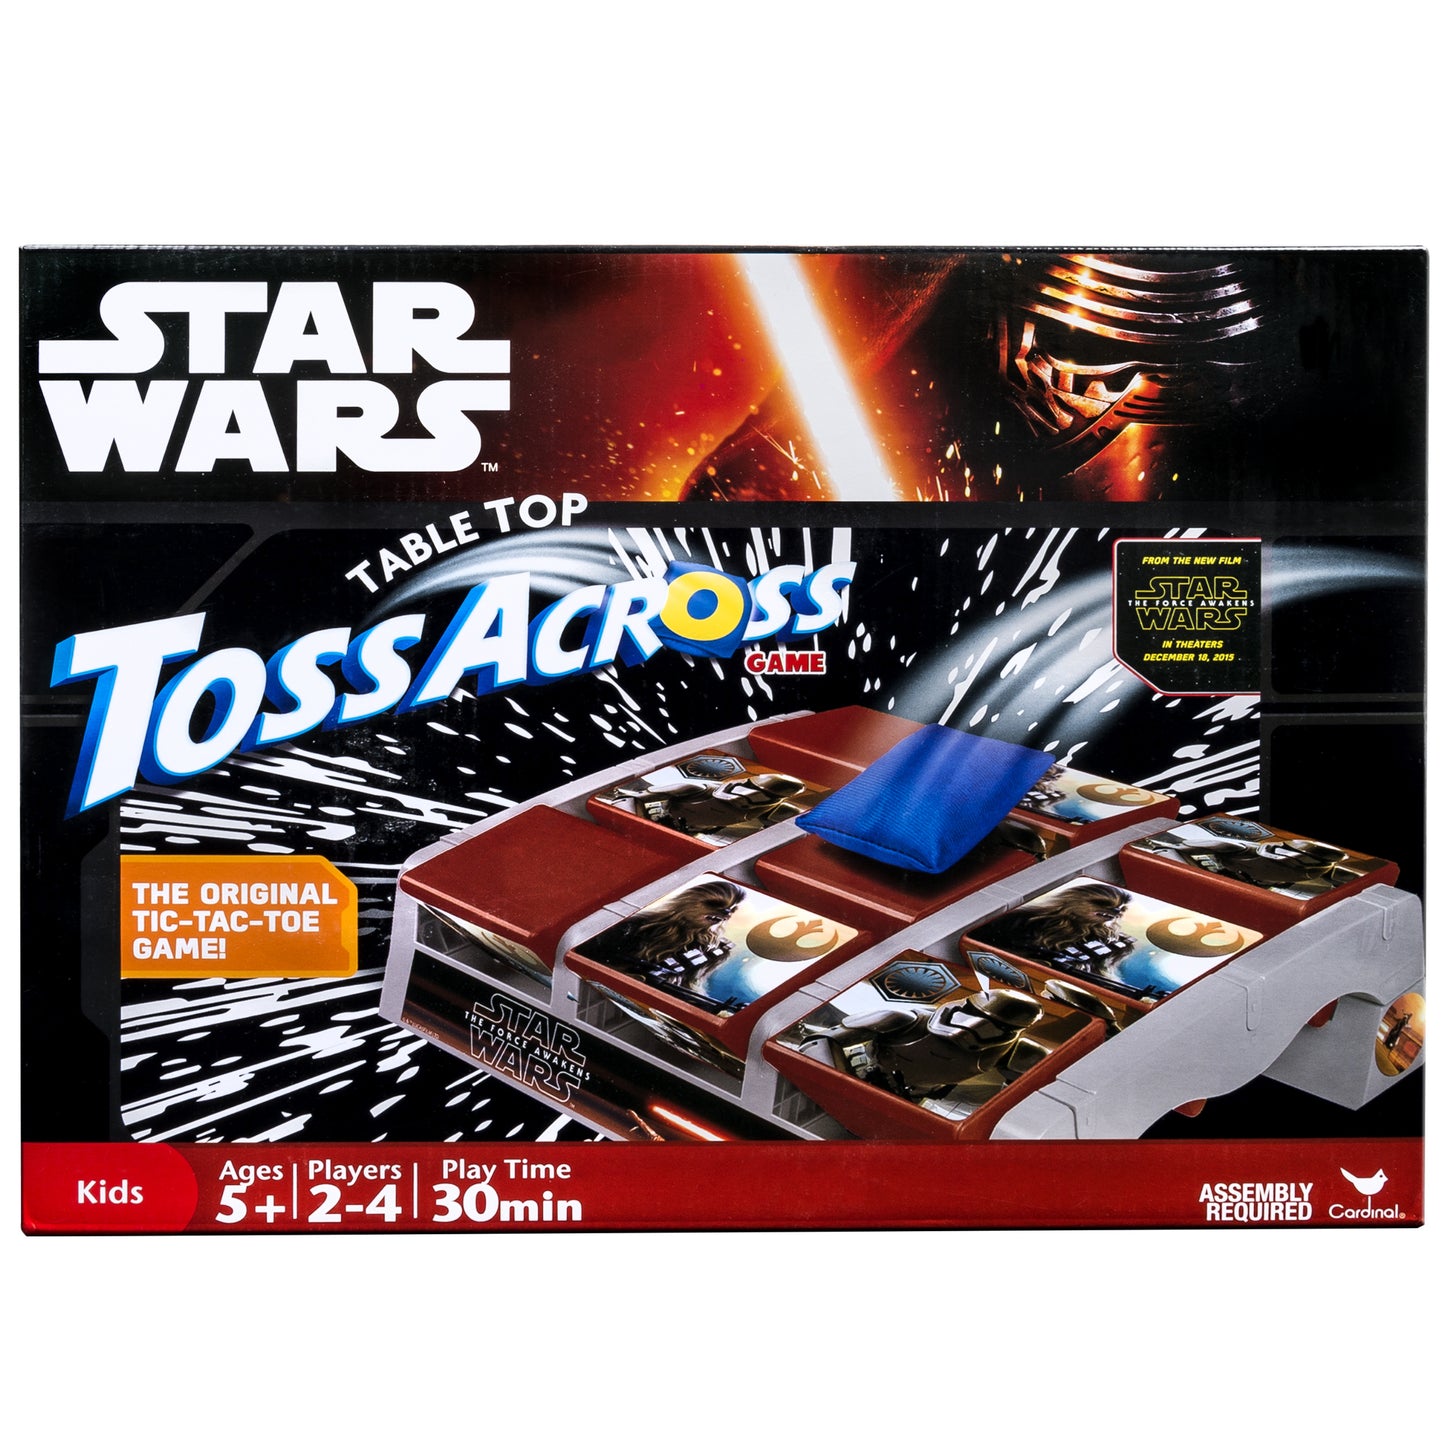 Classic Toss Across Game License- Star Wars and Finding Dory